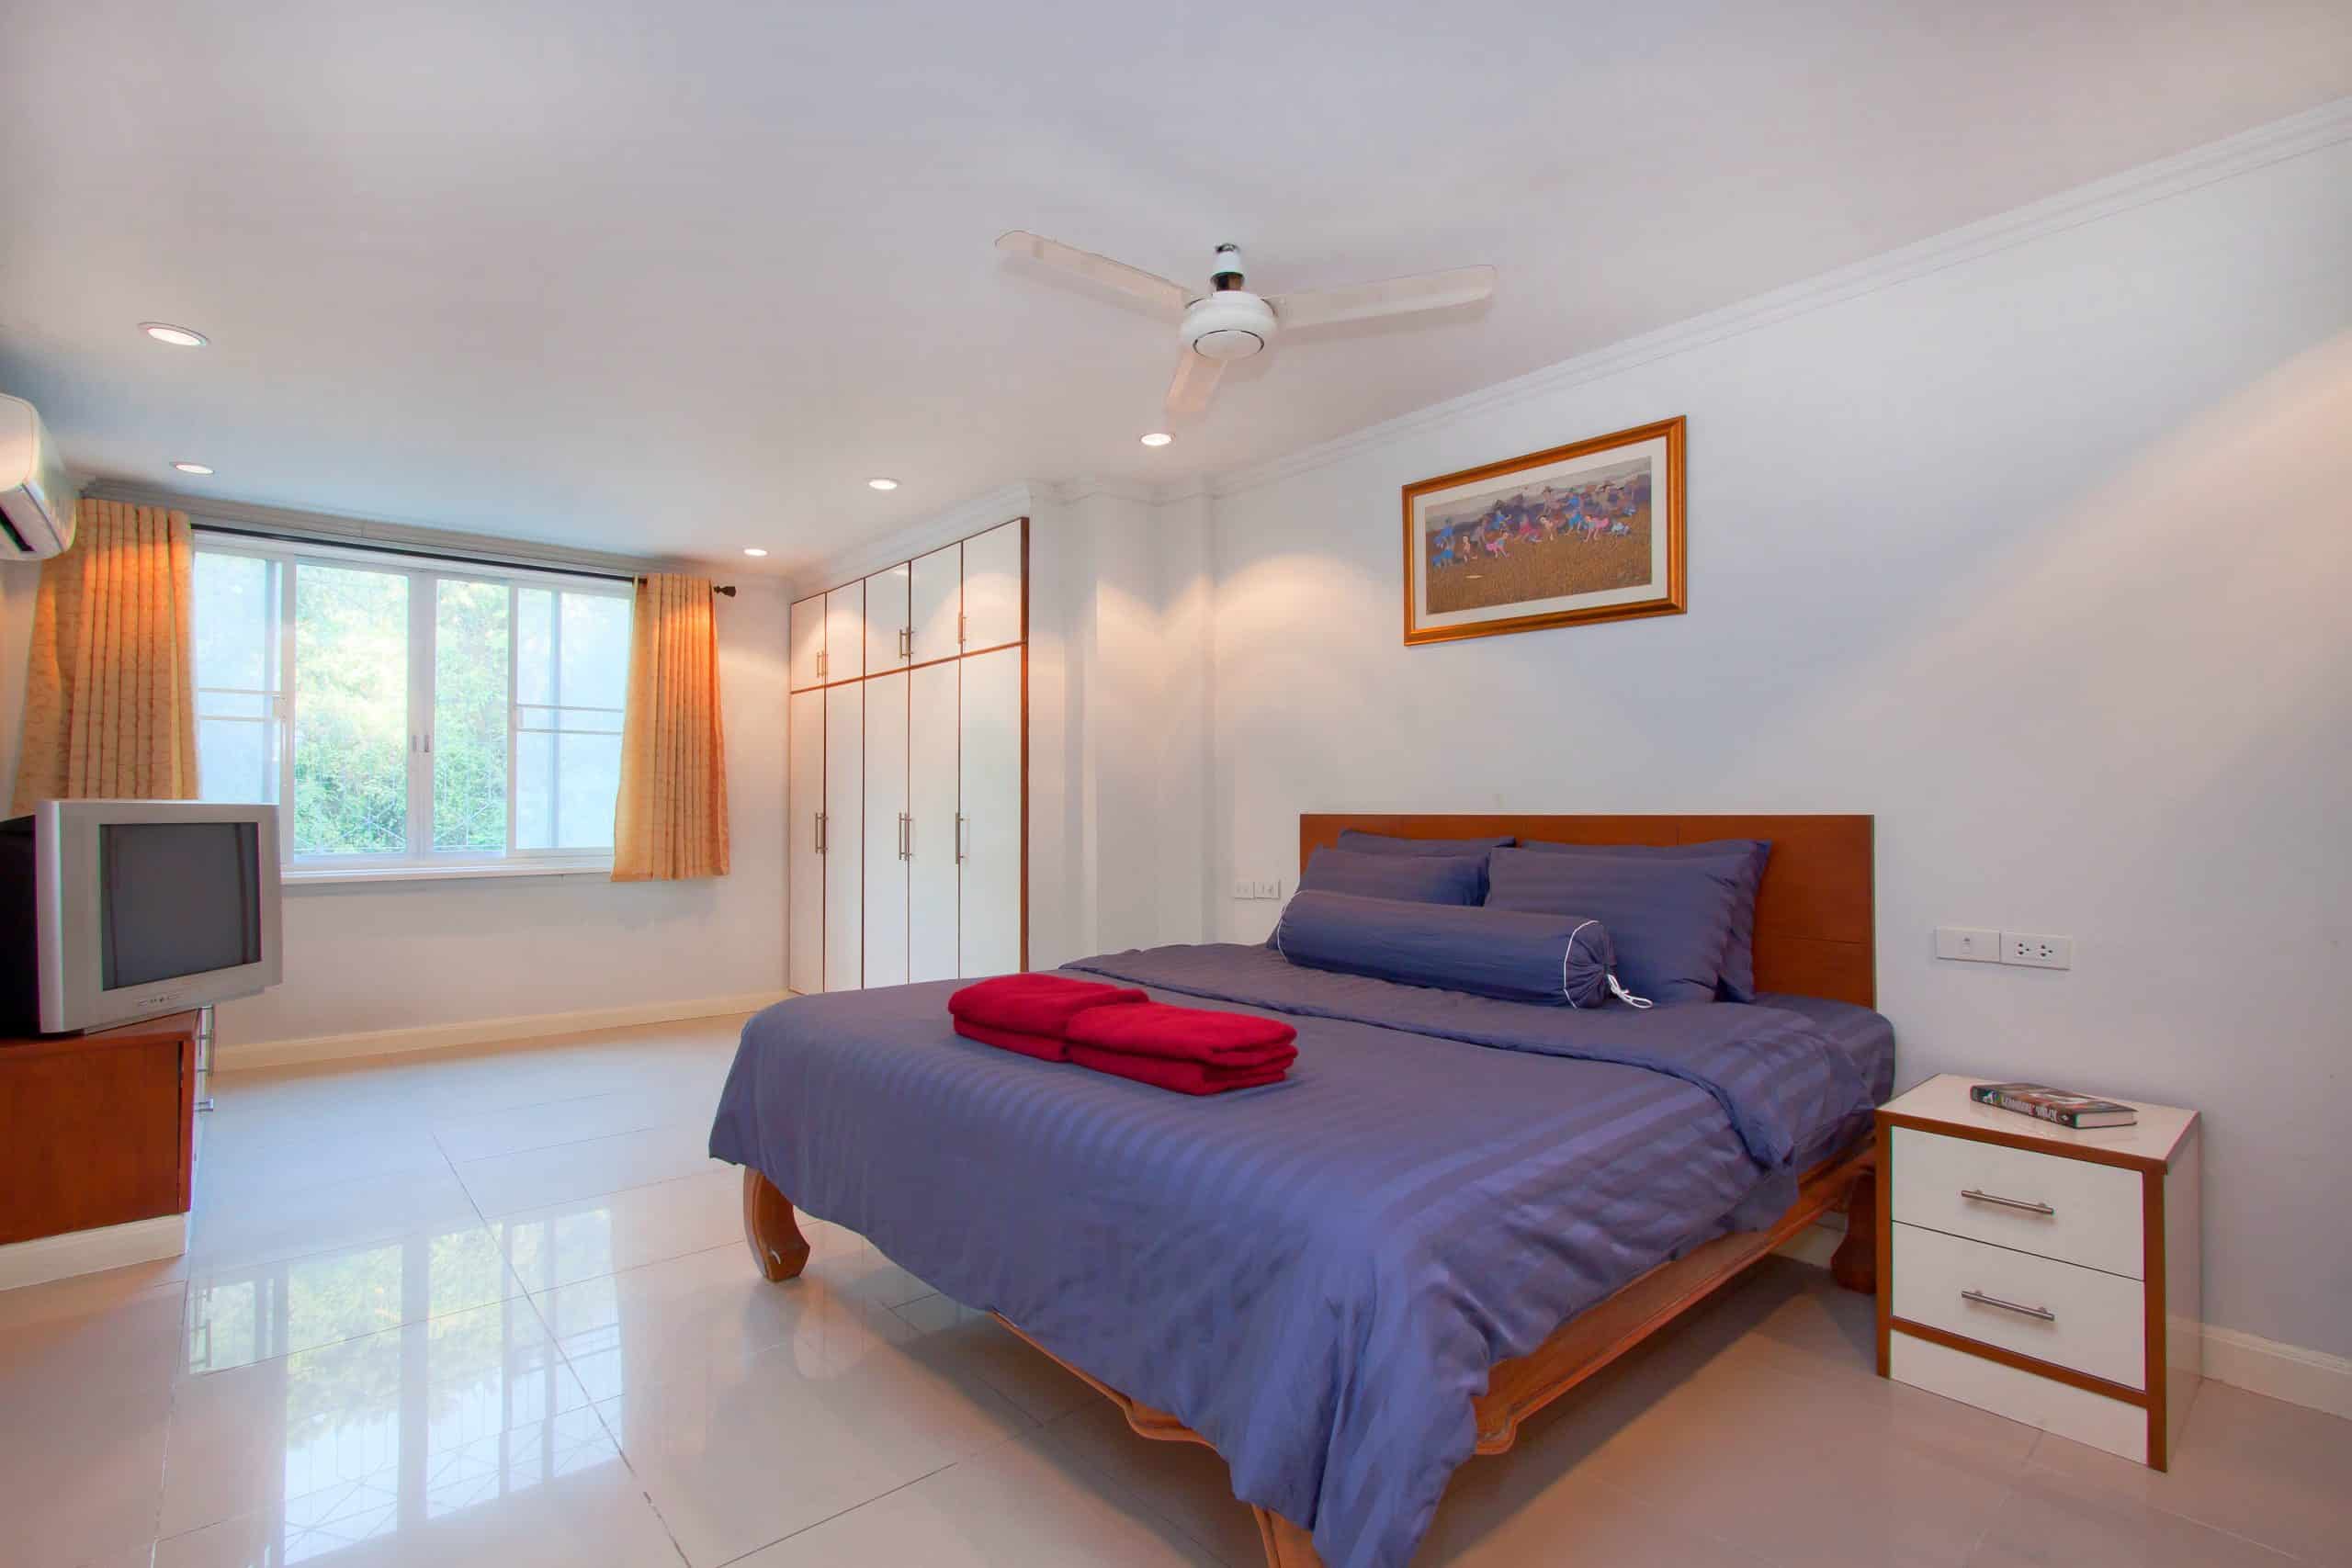 Discover the Best of Pattaya Living at Argyle's Rentals Find the perfect Pattaya rental to suit your needs and budget with Argyle's Rentals - Pattaya's premier holiday rental provider.